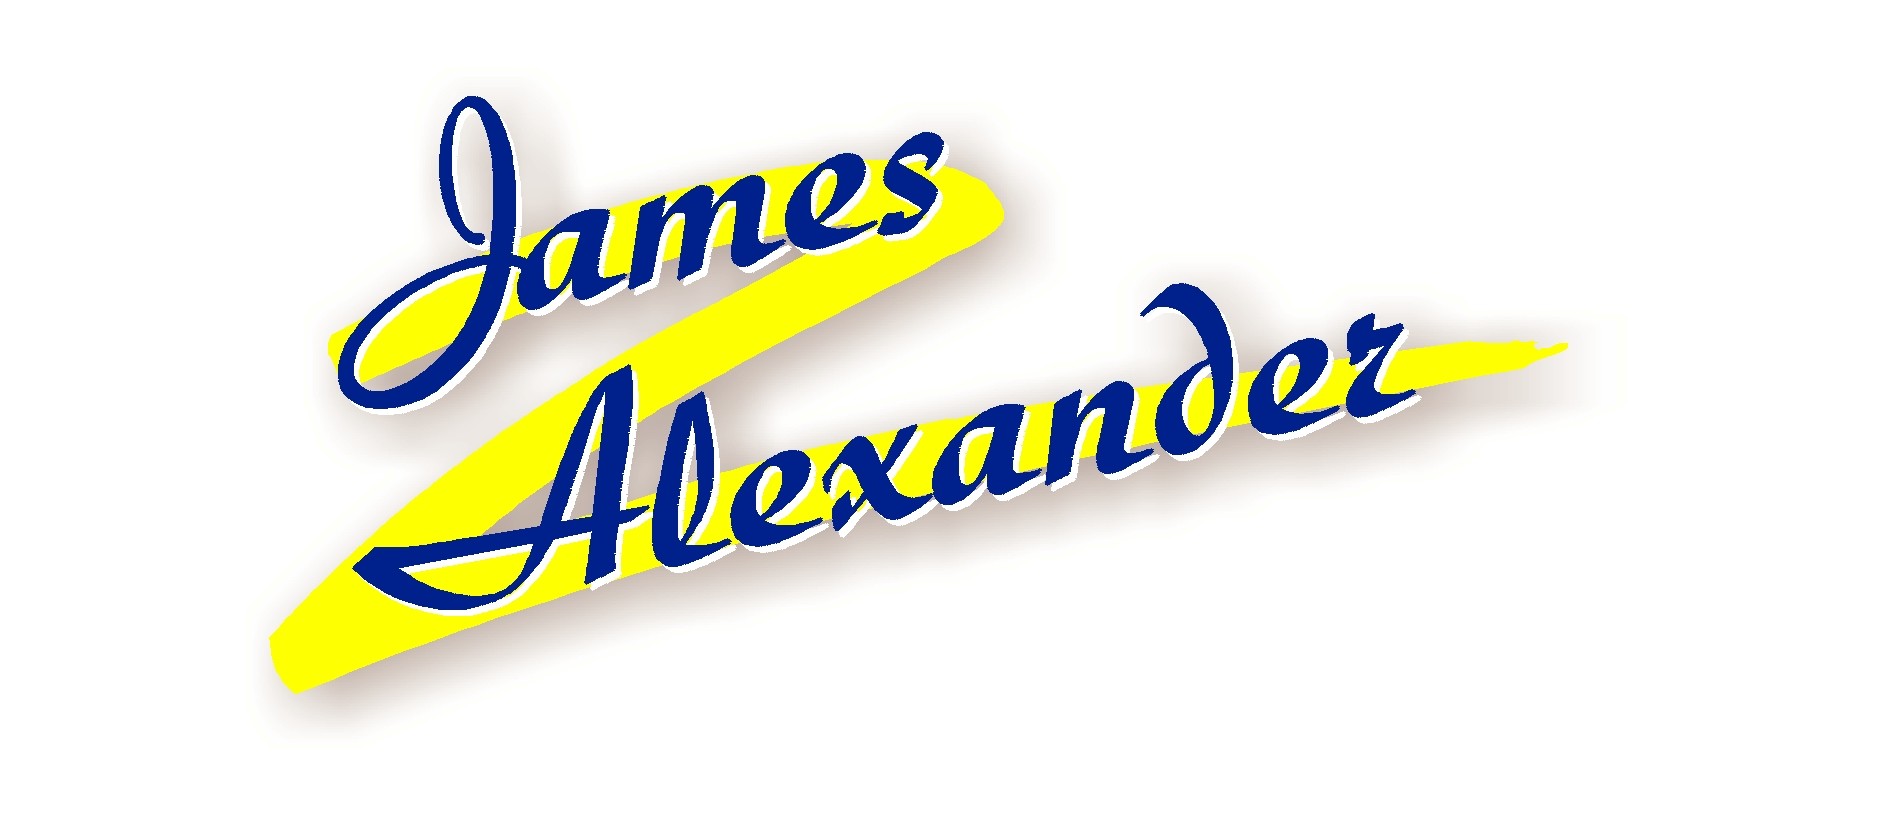 Please contact James Alexander Network Auctions on 020 8679 8601.